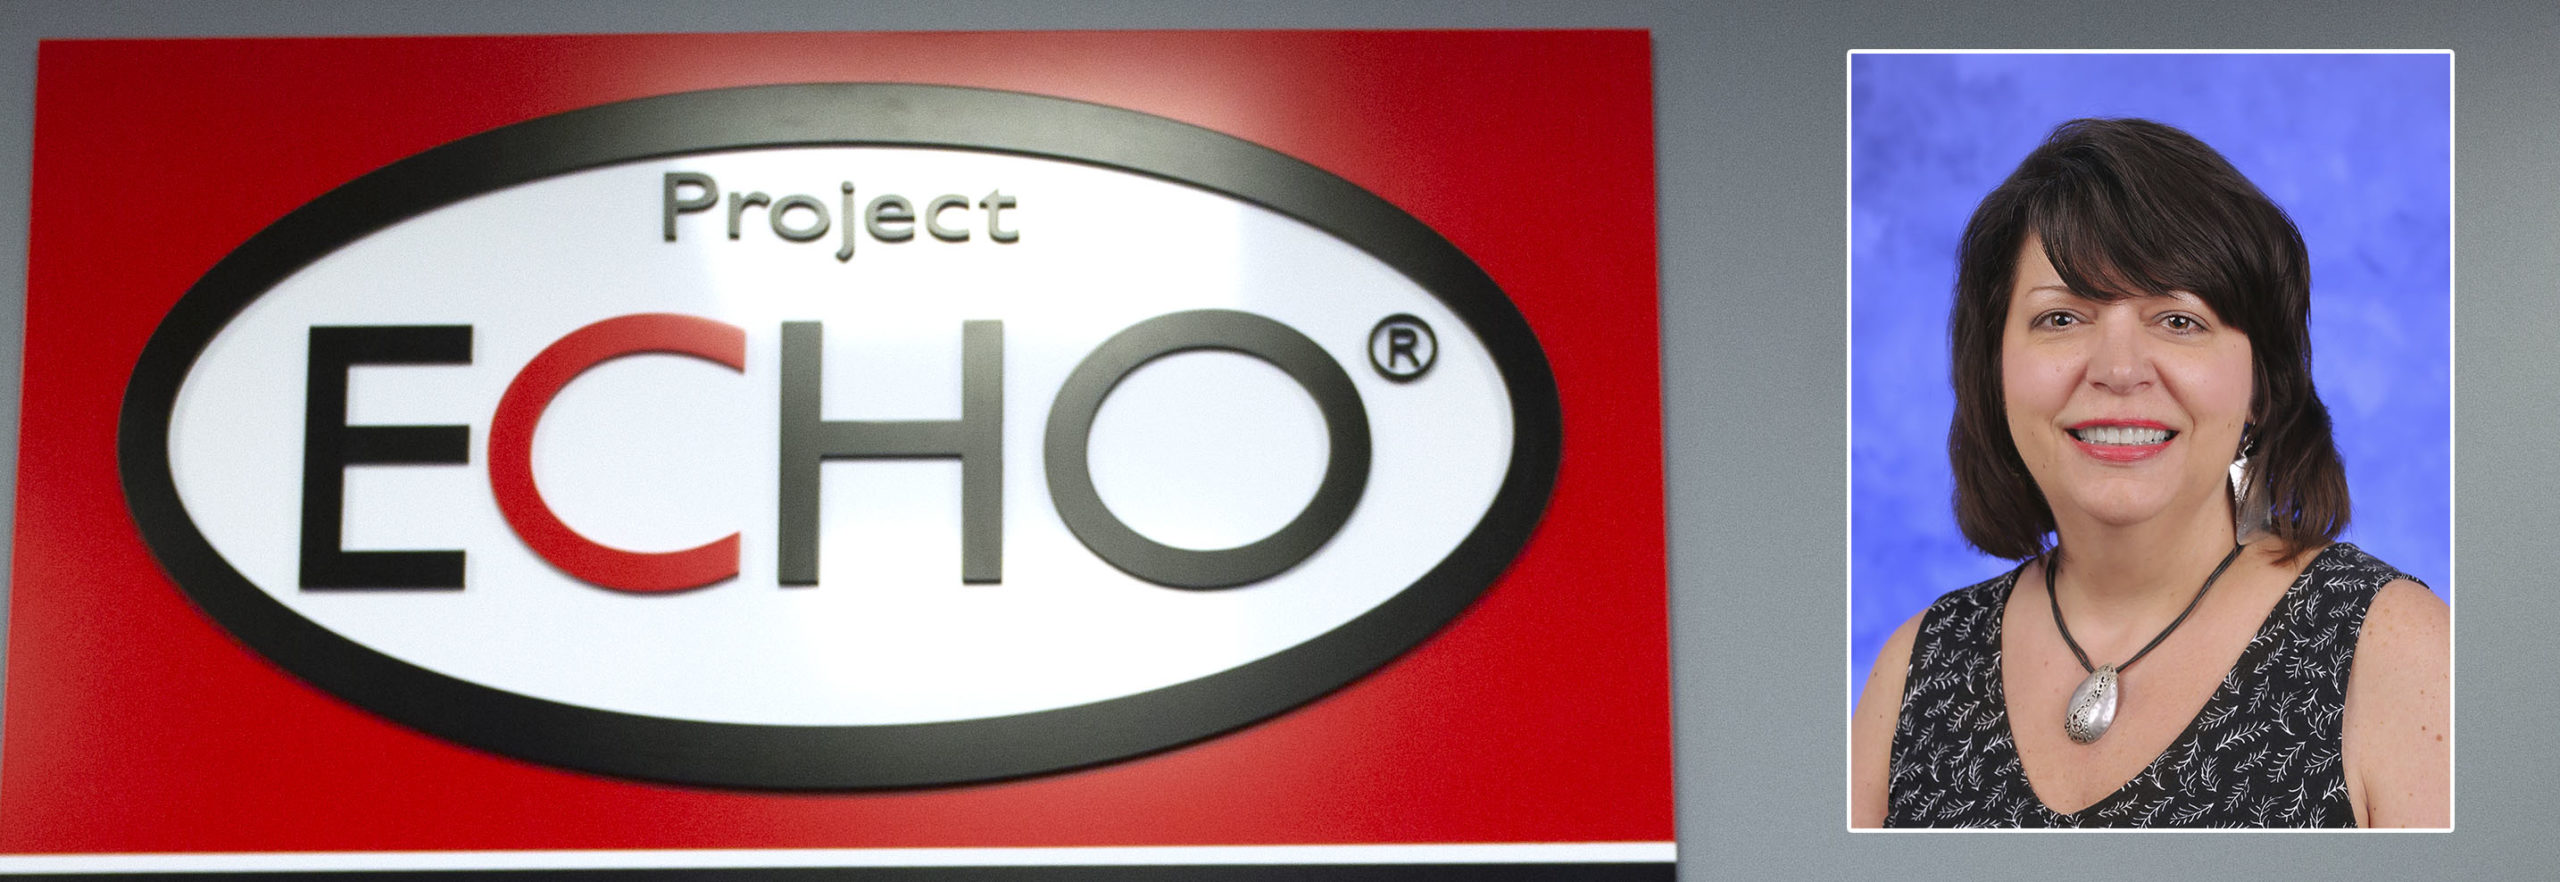 A Project ECHO logo banner with a head-and-shoulders professional portrait of Jackie Sabol superimposed on the right.